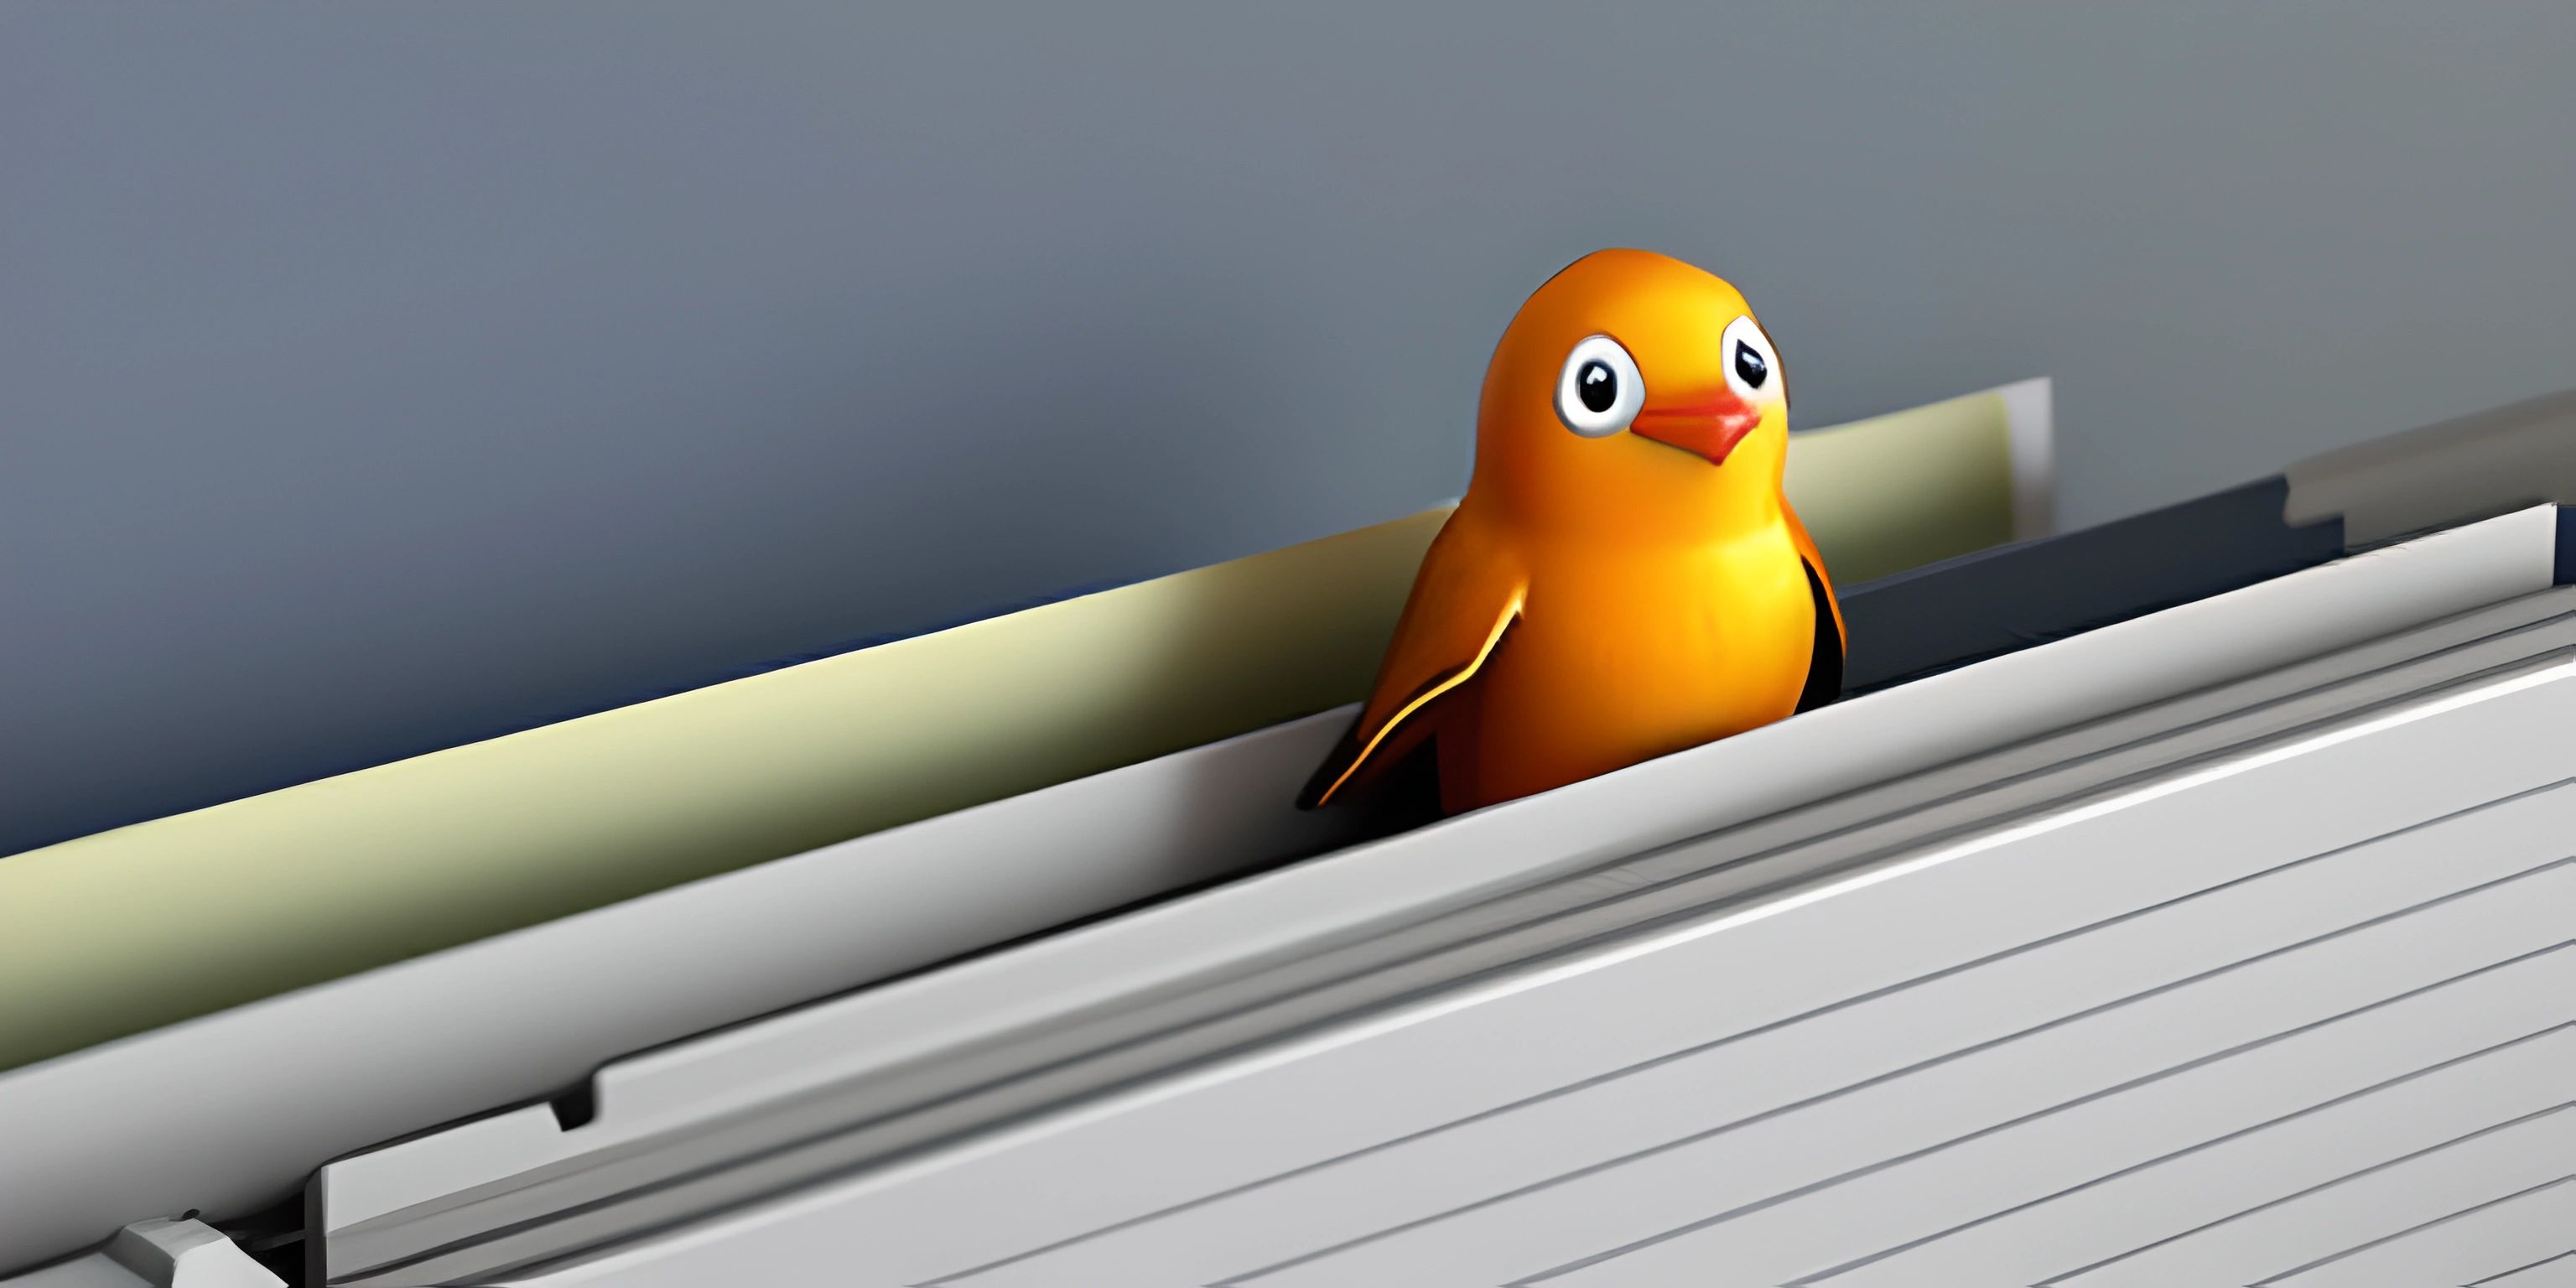 the little orange bird is looking out from the radiator's windowsill